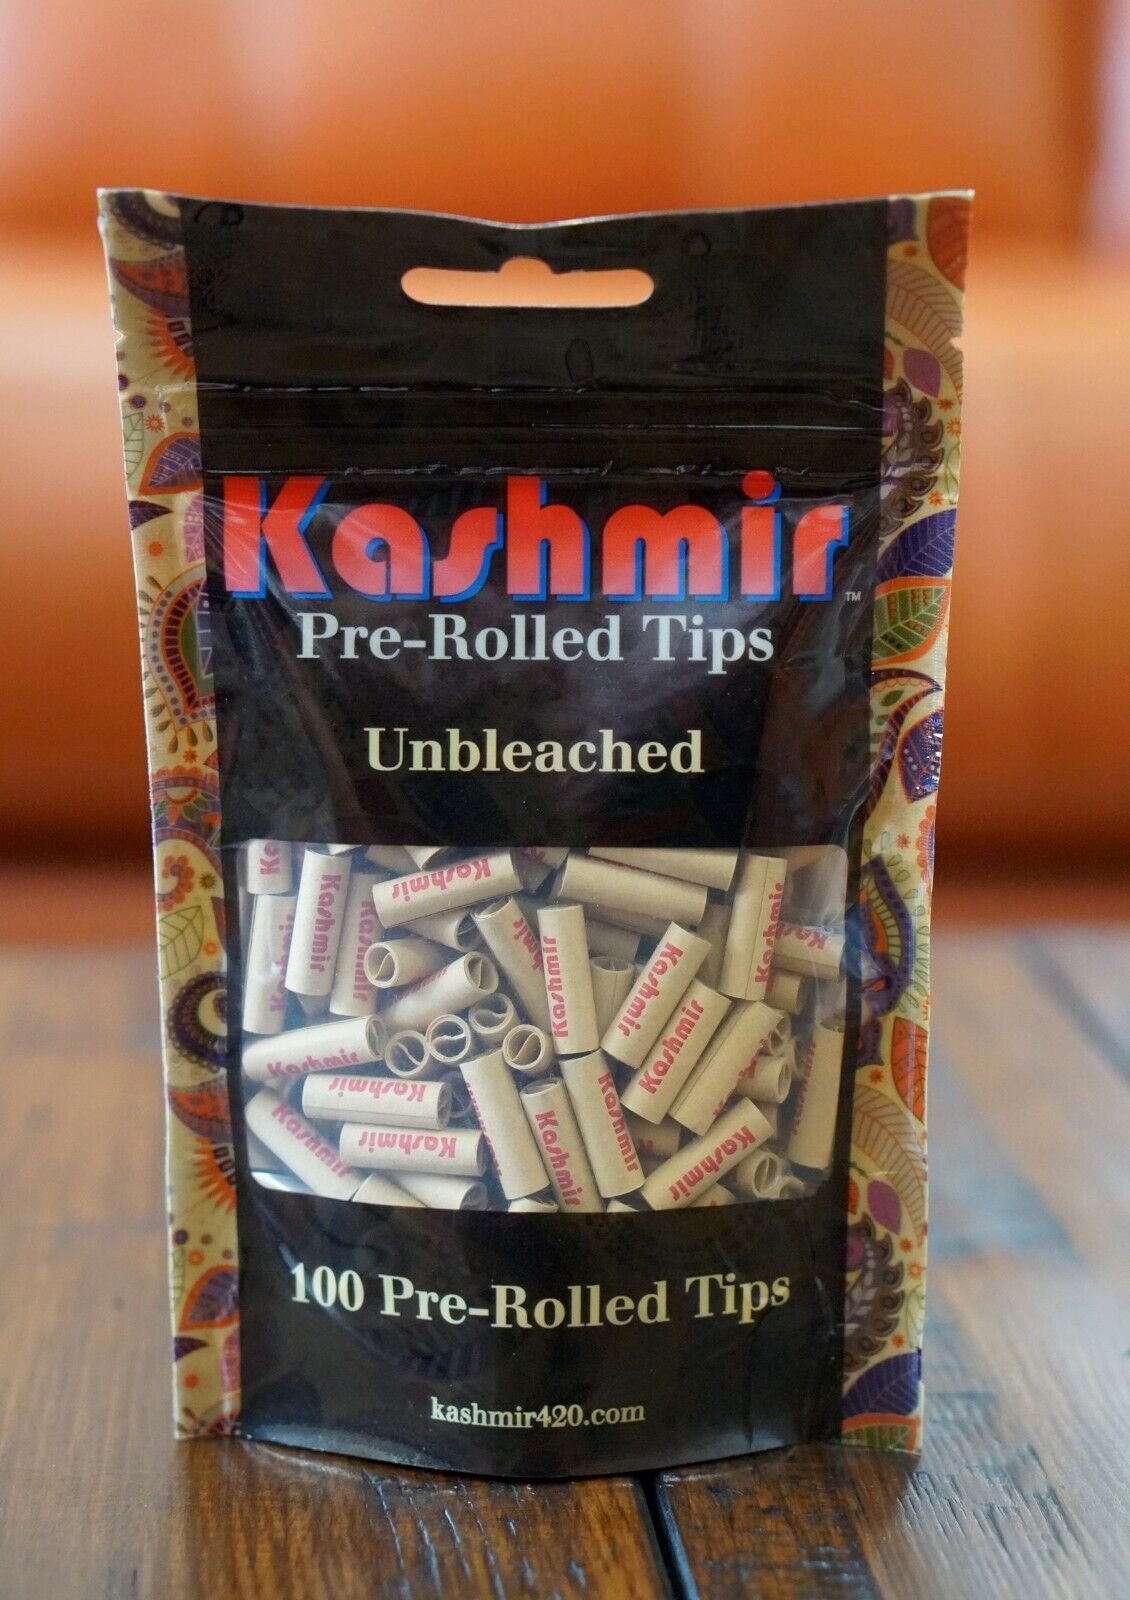 Kashmir Pre Rolled Tips Authentic Tips Unbleached Cigarette Filter Tips - 100ct 